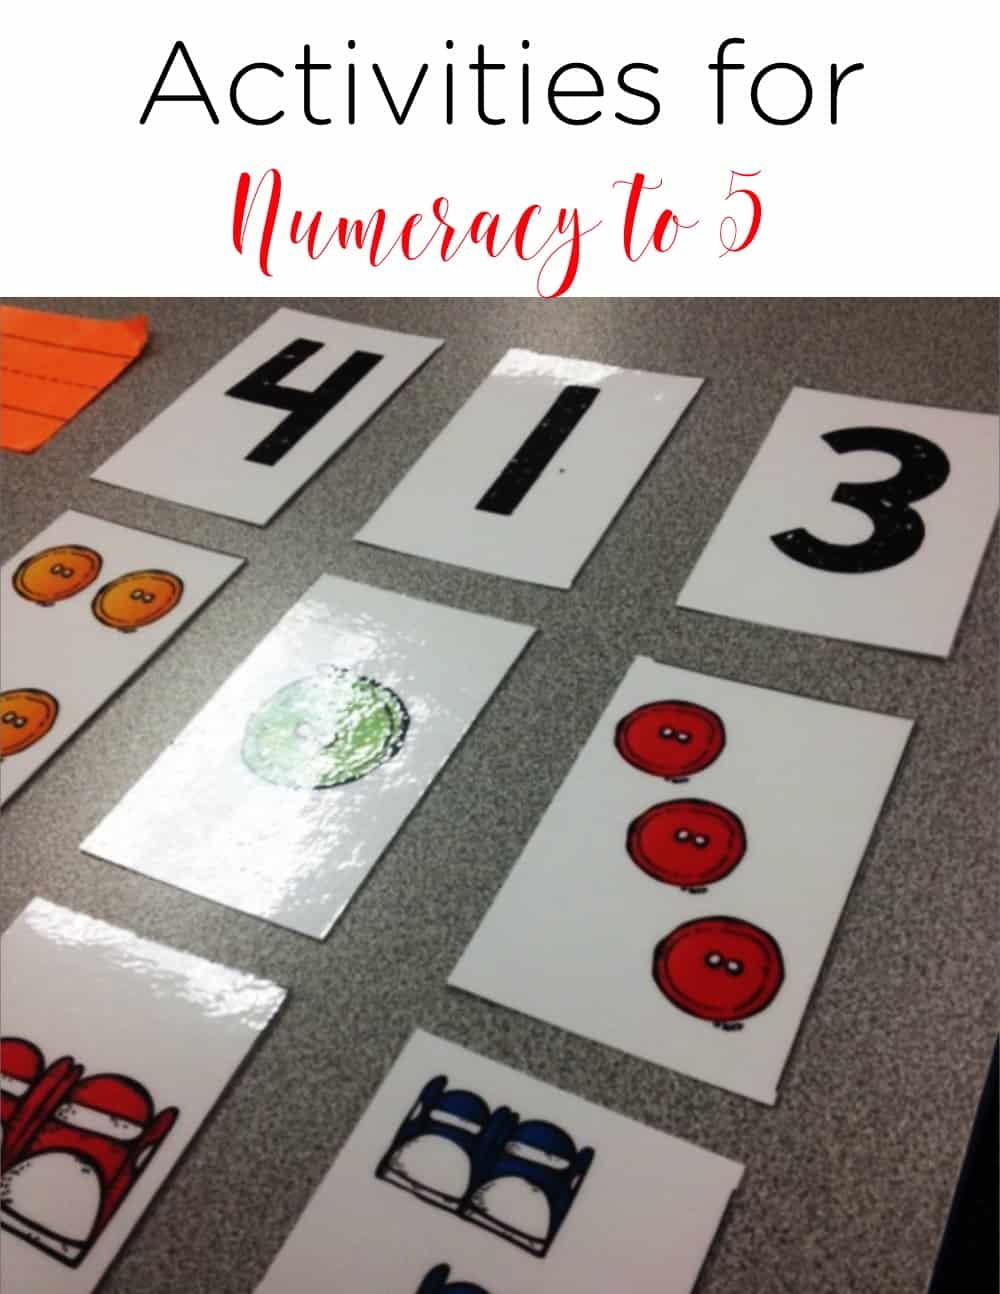 Ideas and activities for numeracy with numbers 0-5 that keep learning FUN! Students in preschool or kindergarten will love the games, puzzles, anchor chart ideas, and ten frame activities! #KindergartenMath #kindergarten